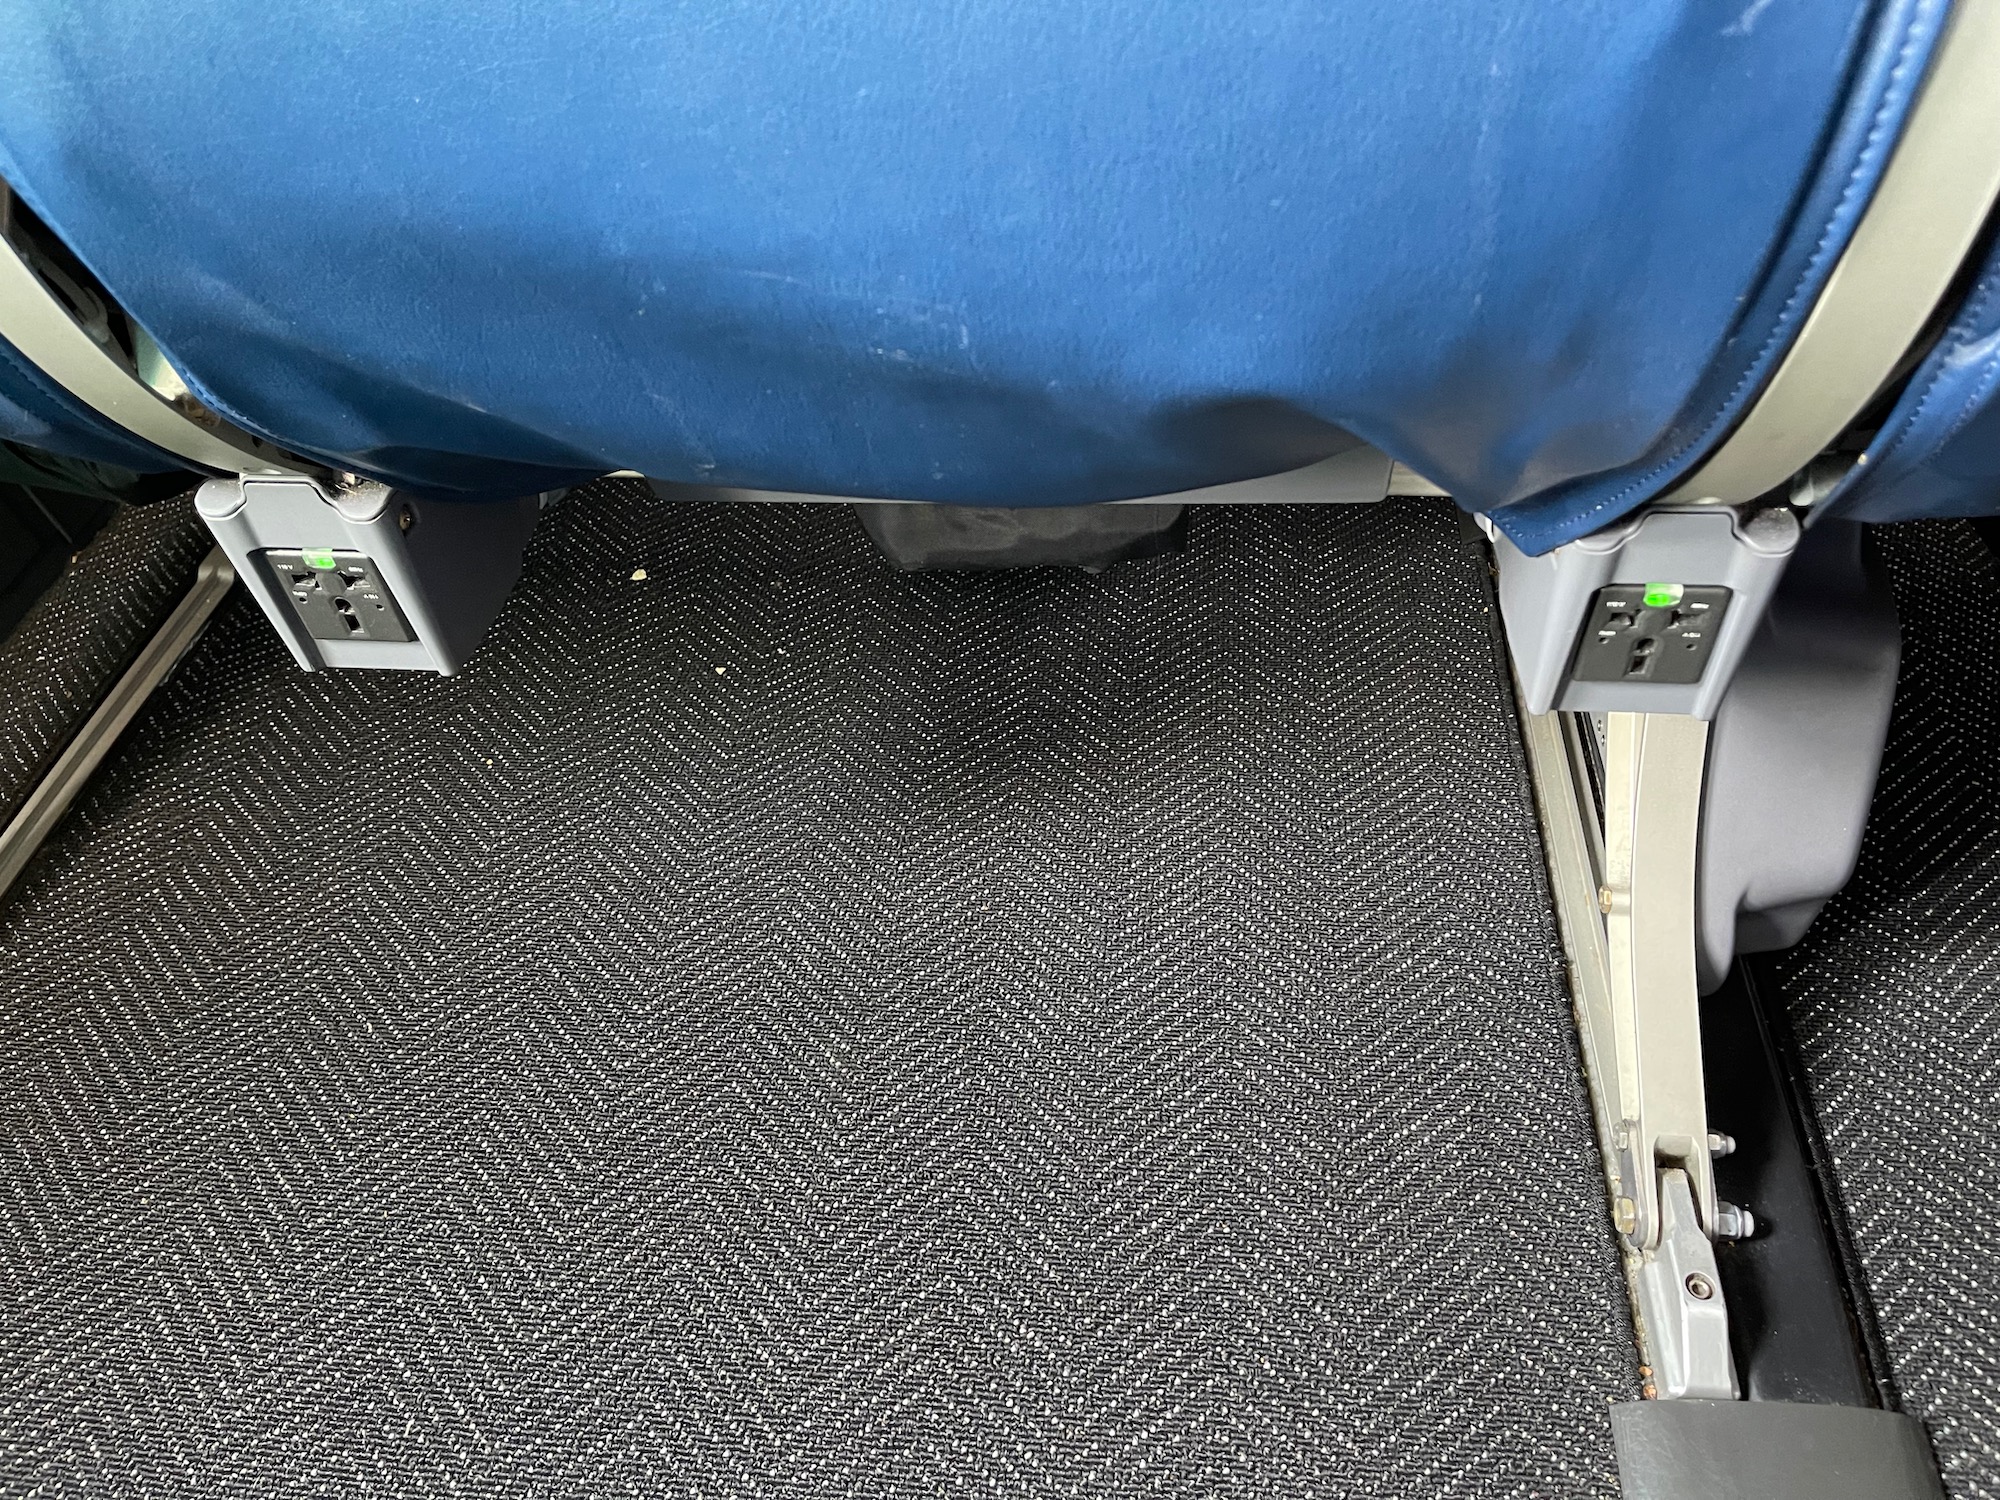 a carpeted floor with electrical outlets